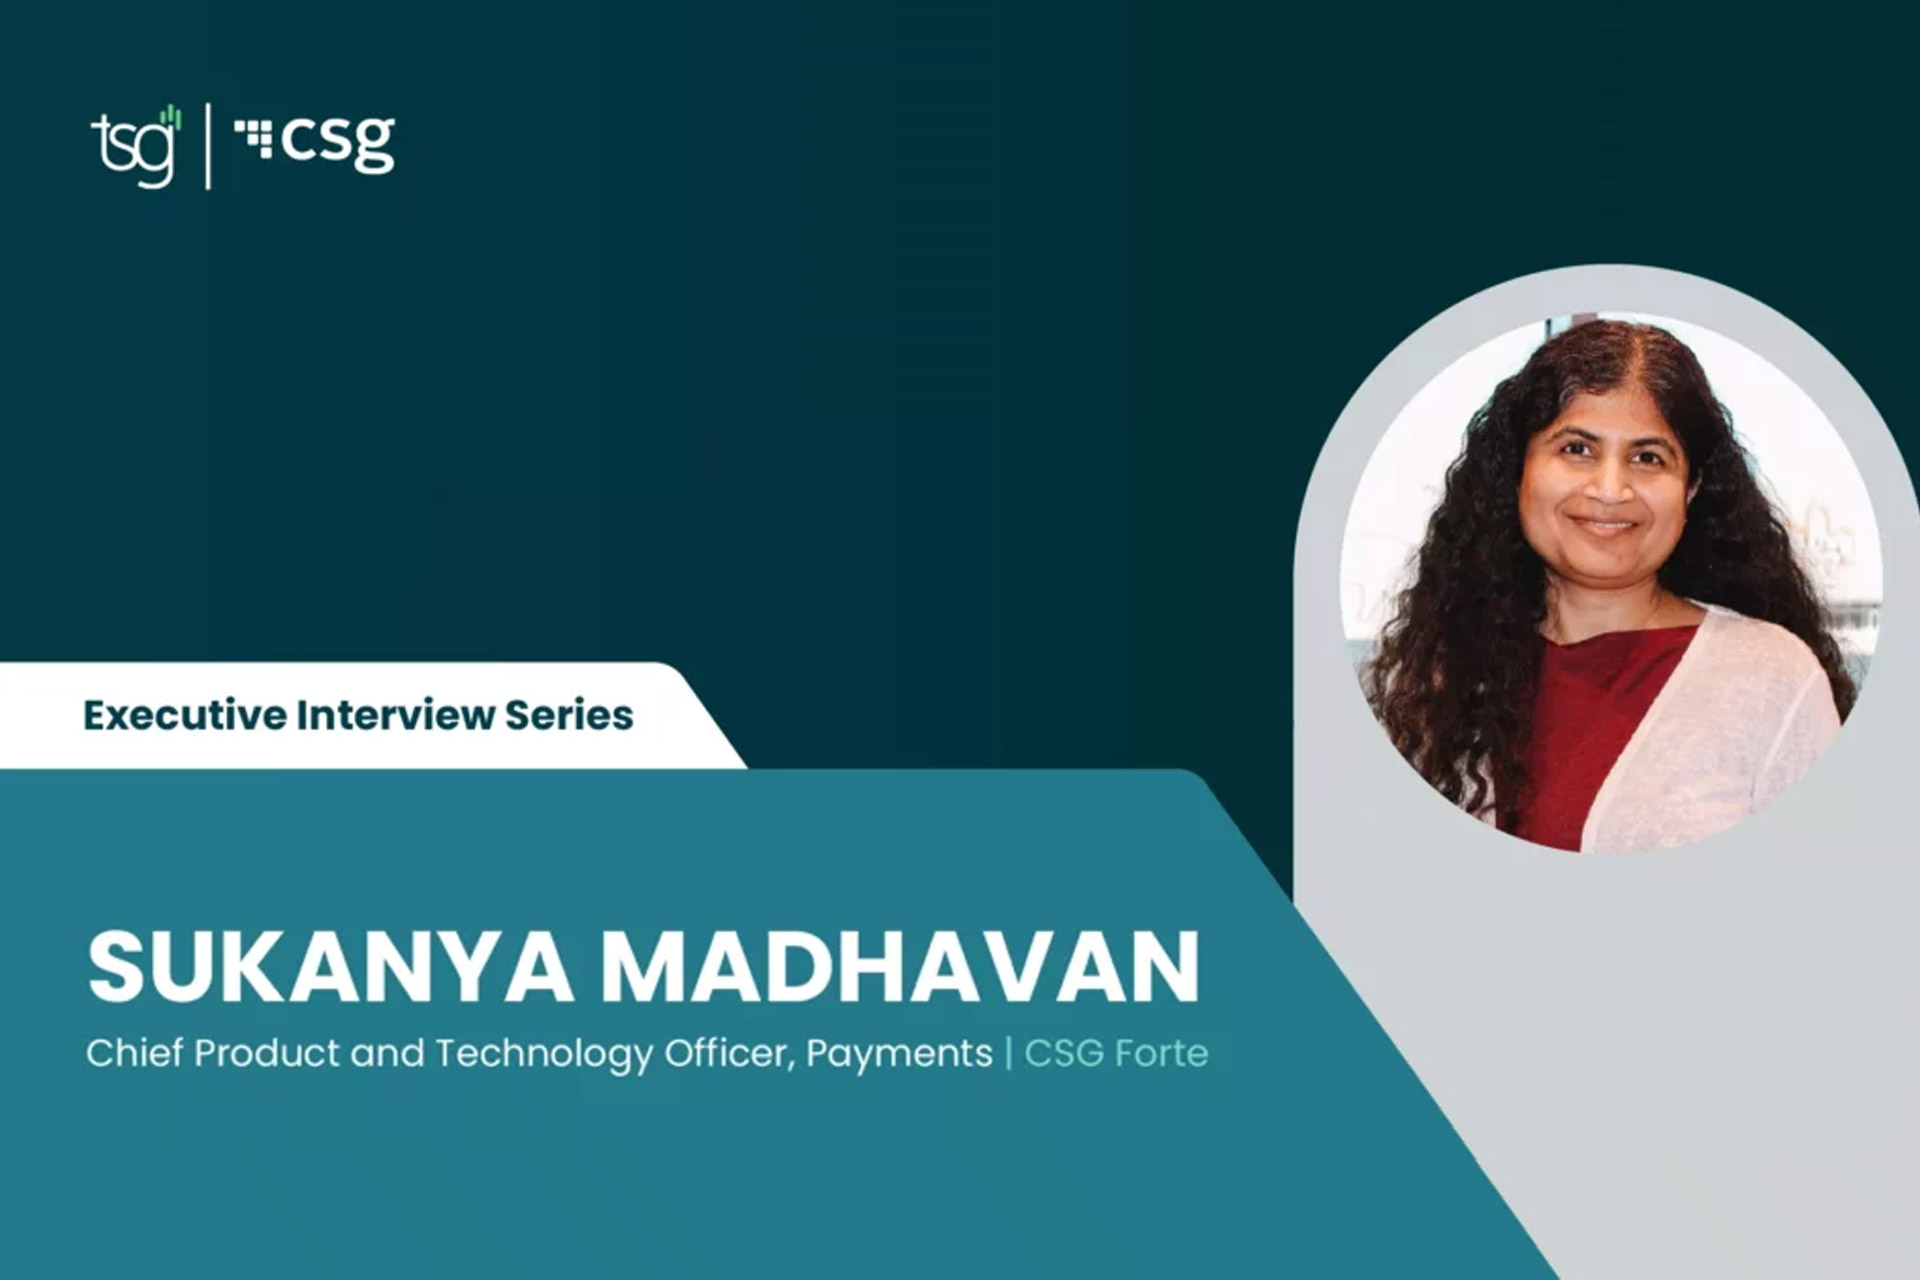 Executive Interview Series: Sukanya Madhavan, Chief Product and Technology Officer, Payments, CSG